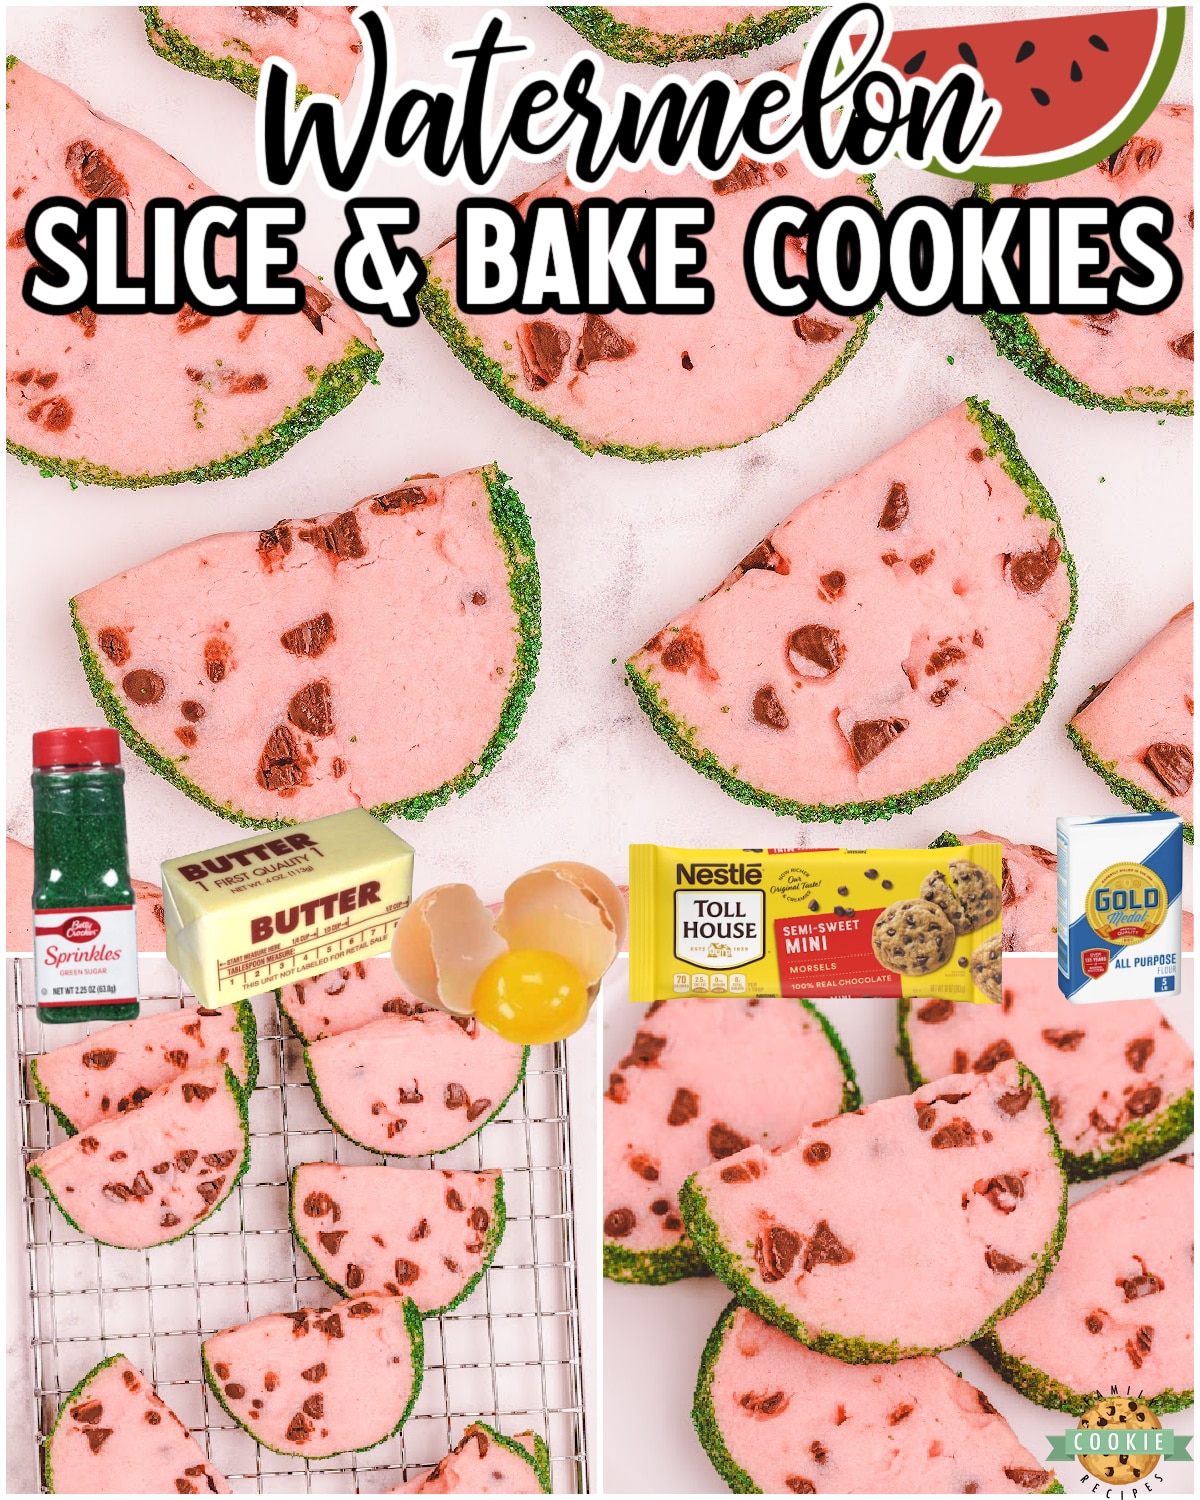 Watermelon Slice and Bake Cookies are a tender summer butter cookie that's made to look like slices of watermelon, complete with a green sprinkle rind and mini chocolate chip seeds!